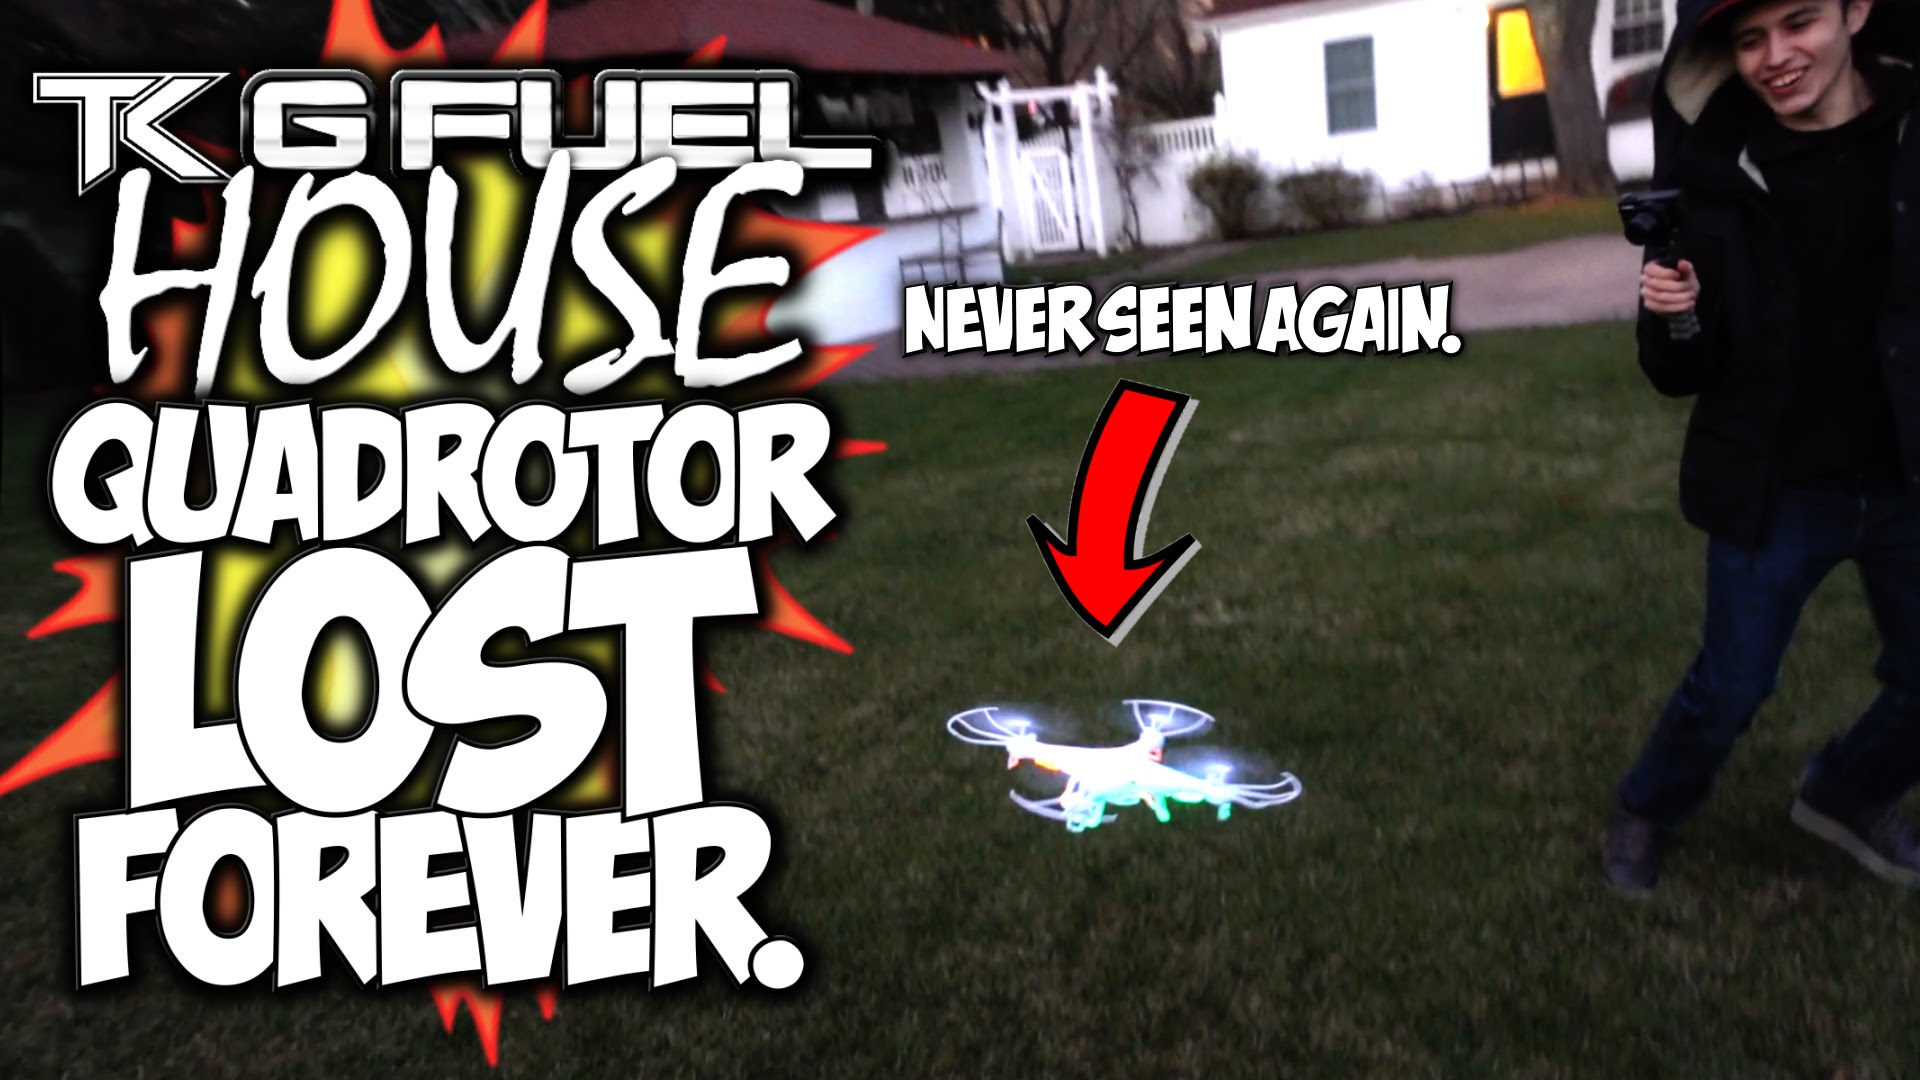 QUADROTOR LOST FOREVER. STUPID QUADCOPTER FAIL!